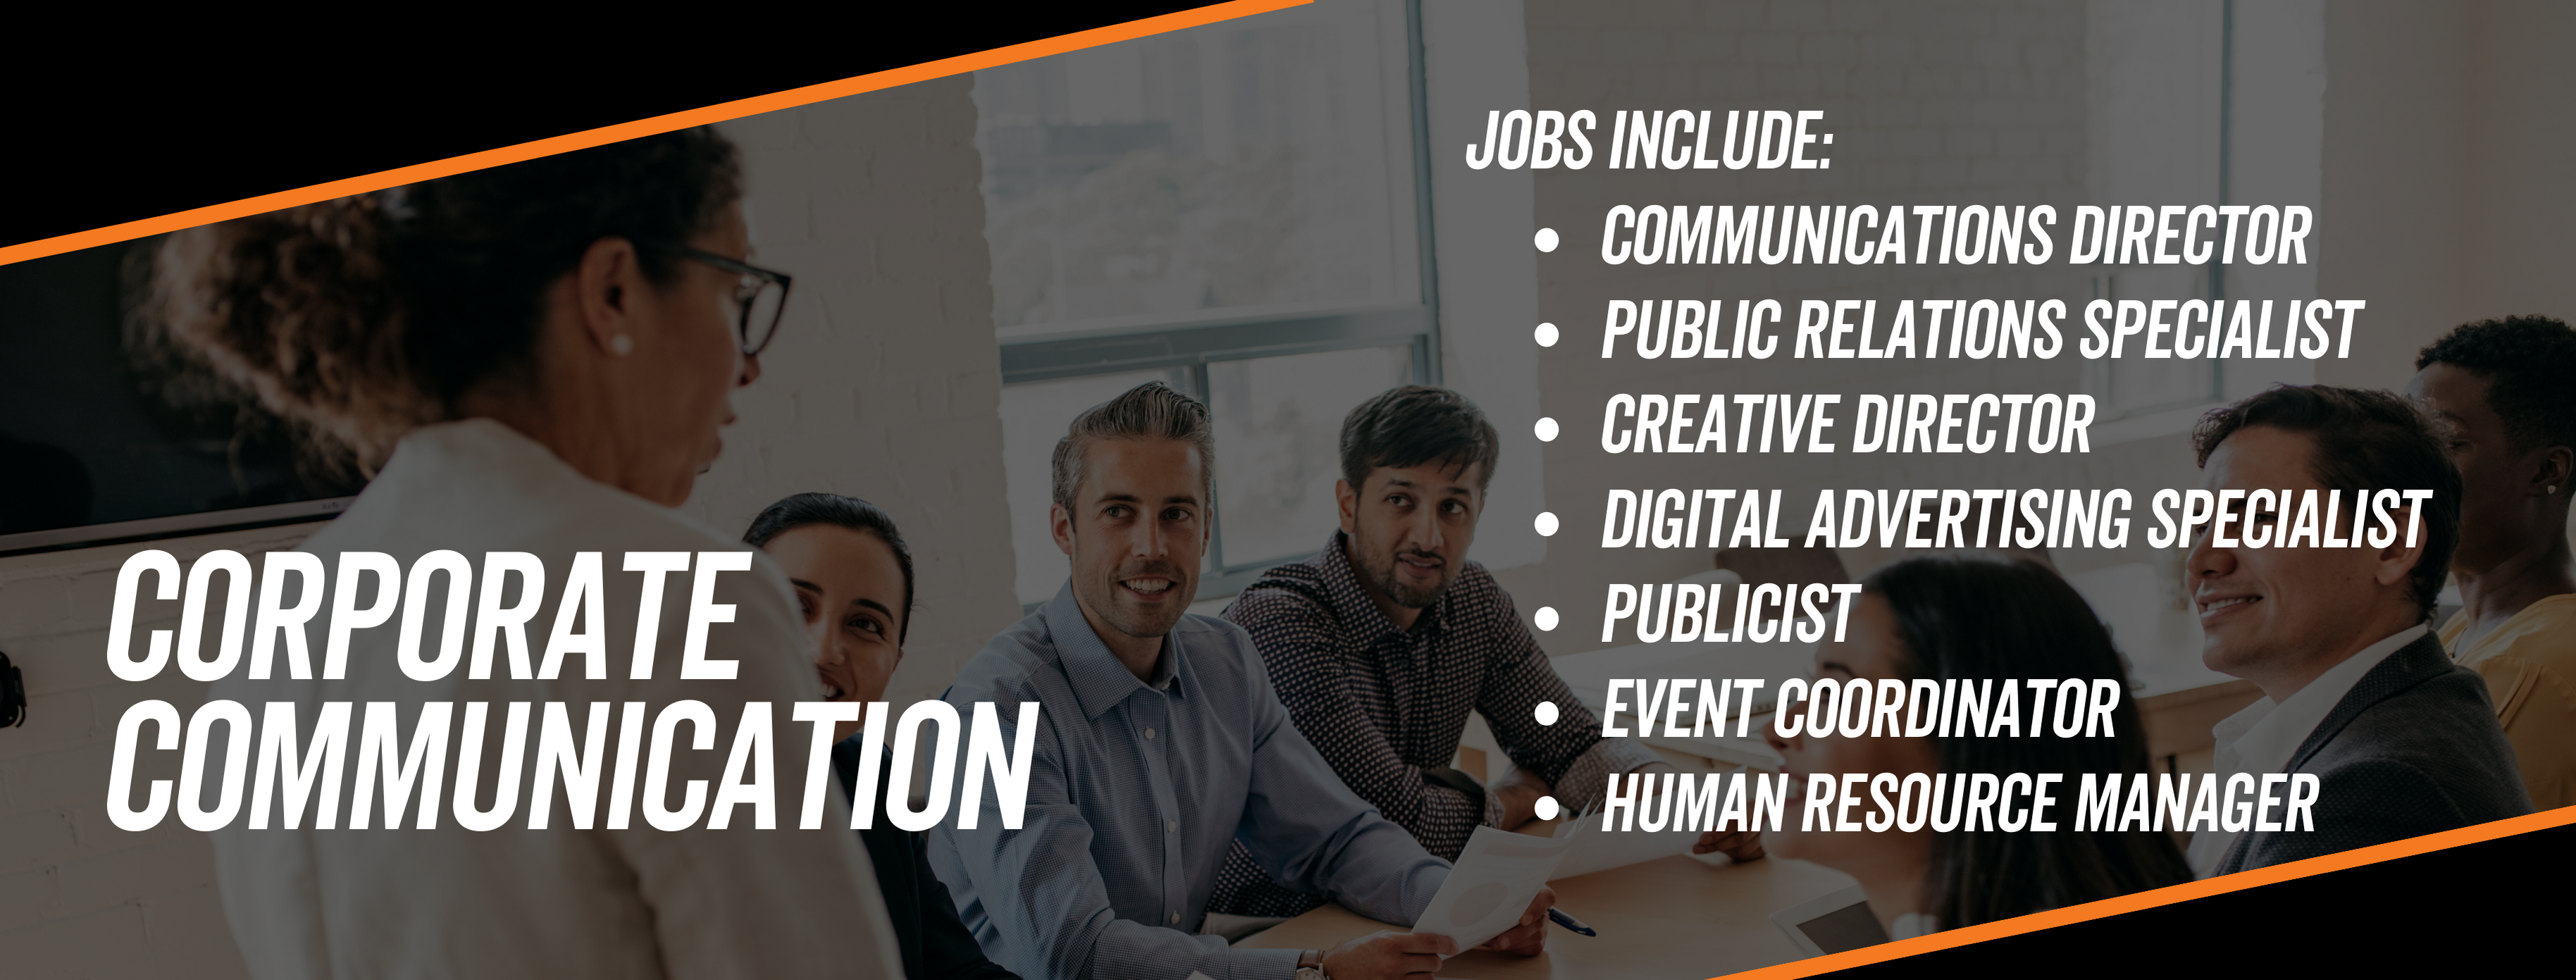 Corporate communications jobs include: communications director, public relations specialist, creative director, digital advertising specialist, publicist, event coordinator, human resource manager